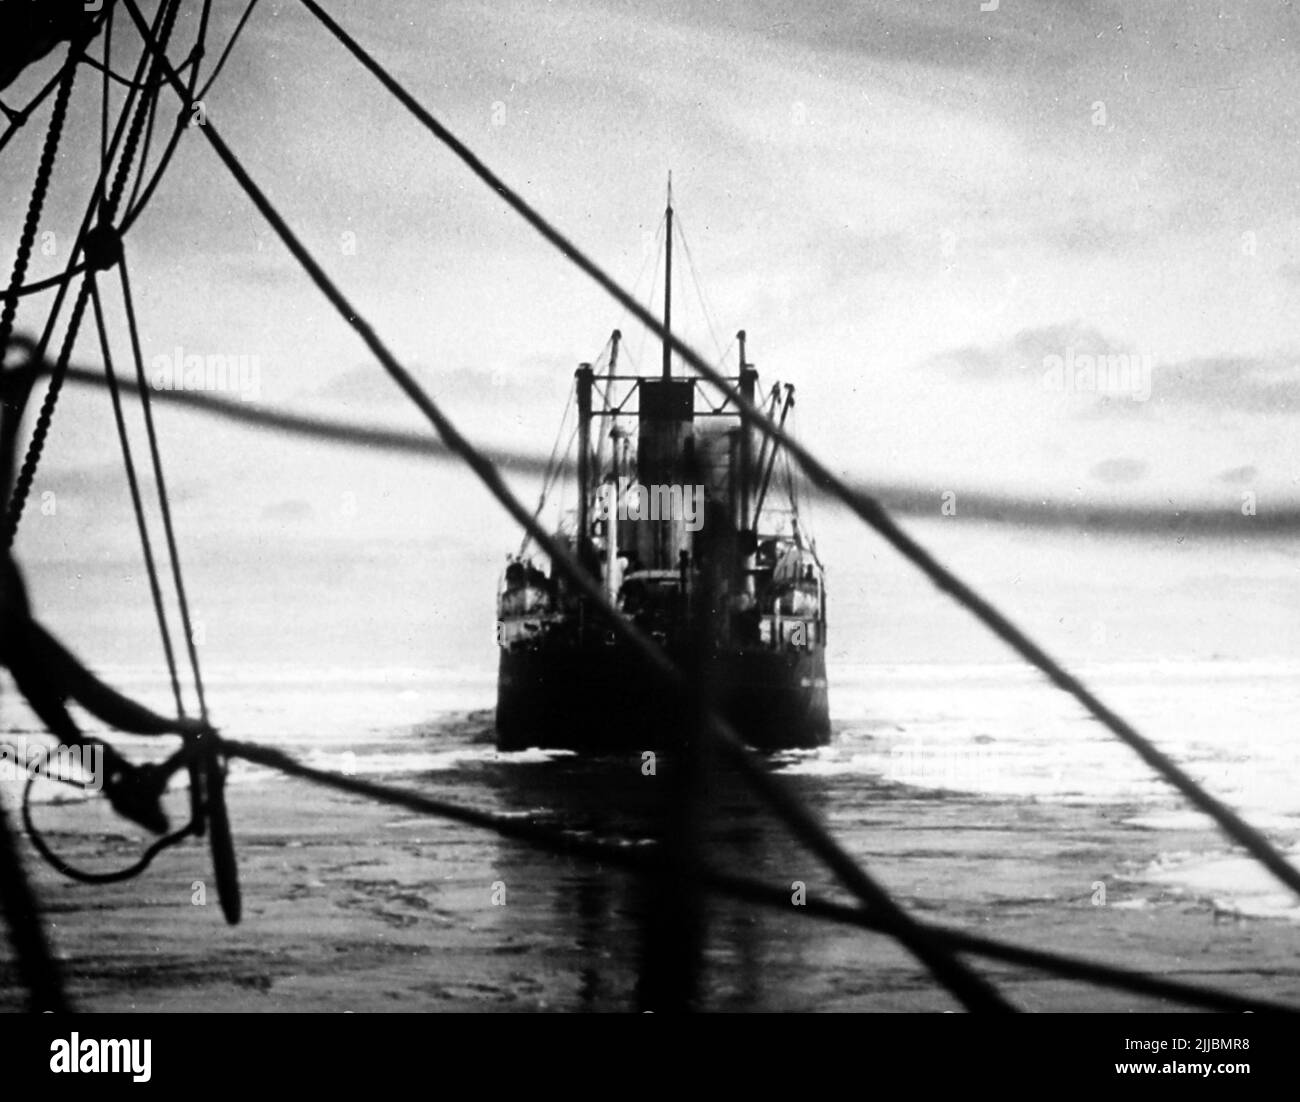 The Larson towing the City of New York through the ice pack, Byrd Antarctic Expedition Stock Photo